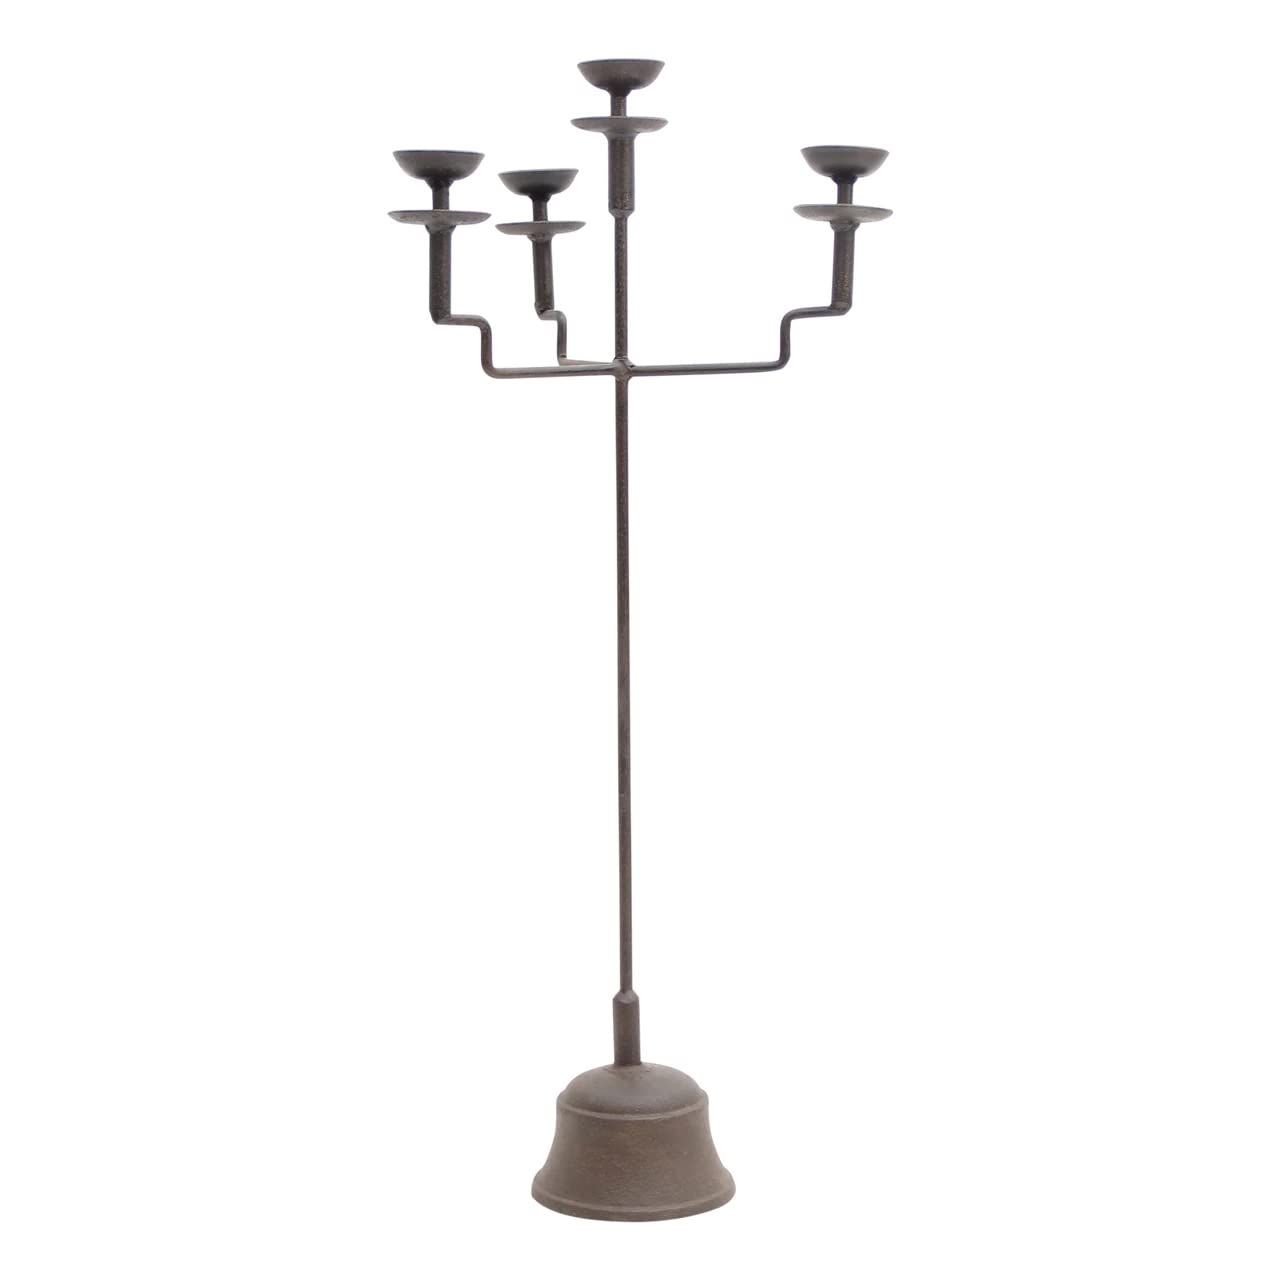 Artissance AM83590150 Rustic Iron Candelabra Style, 31.5 Inch Tall, Brown Candle Holder | Amazon (US)